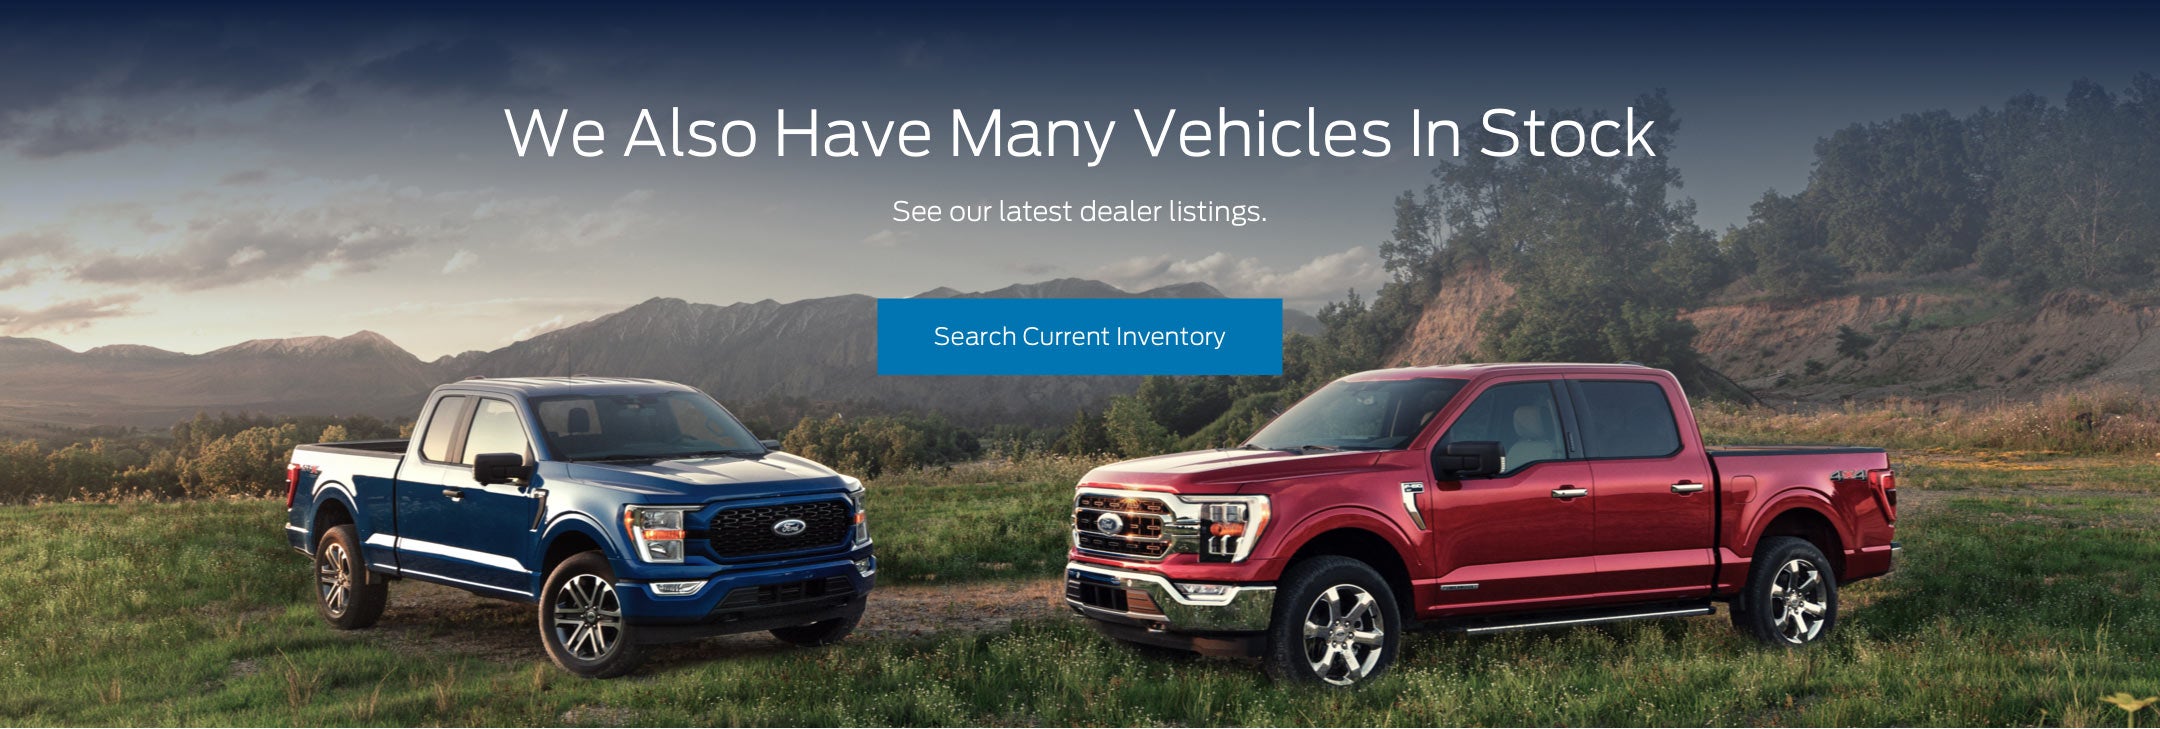 Ford vehicles in stock | Jones Ford in Shallotte NC